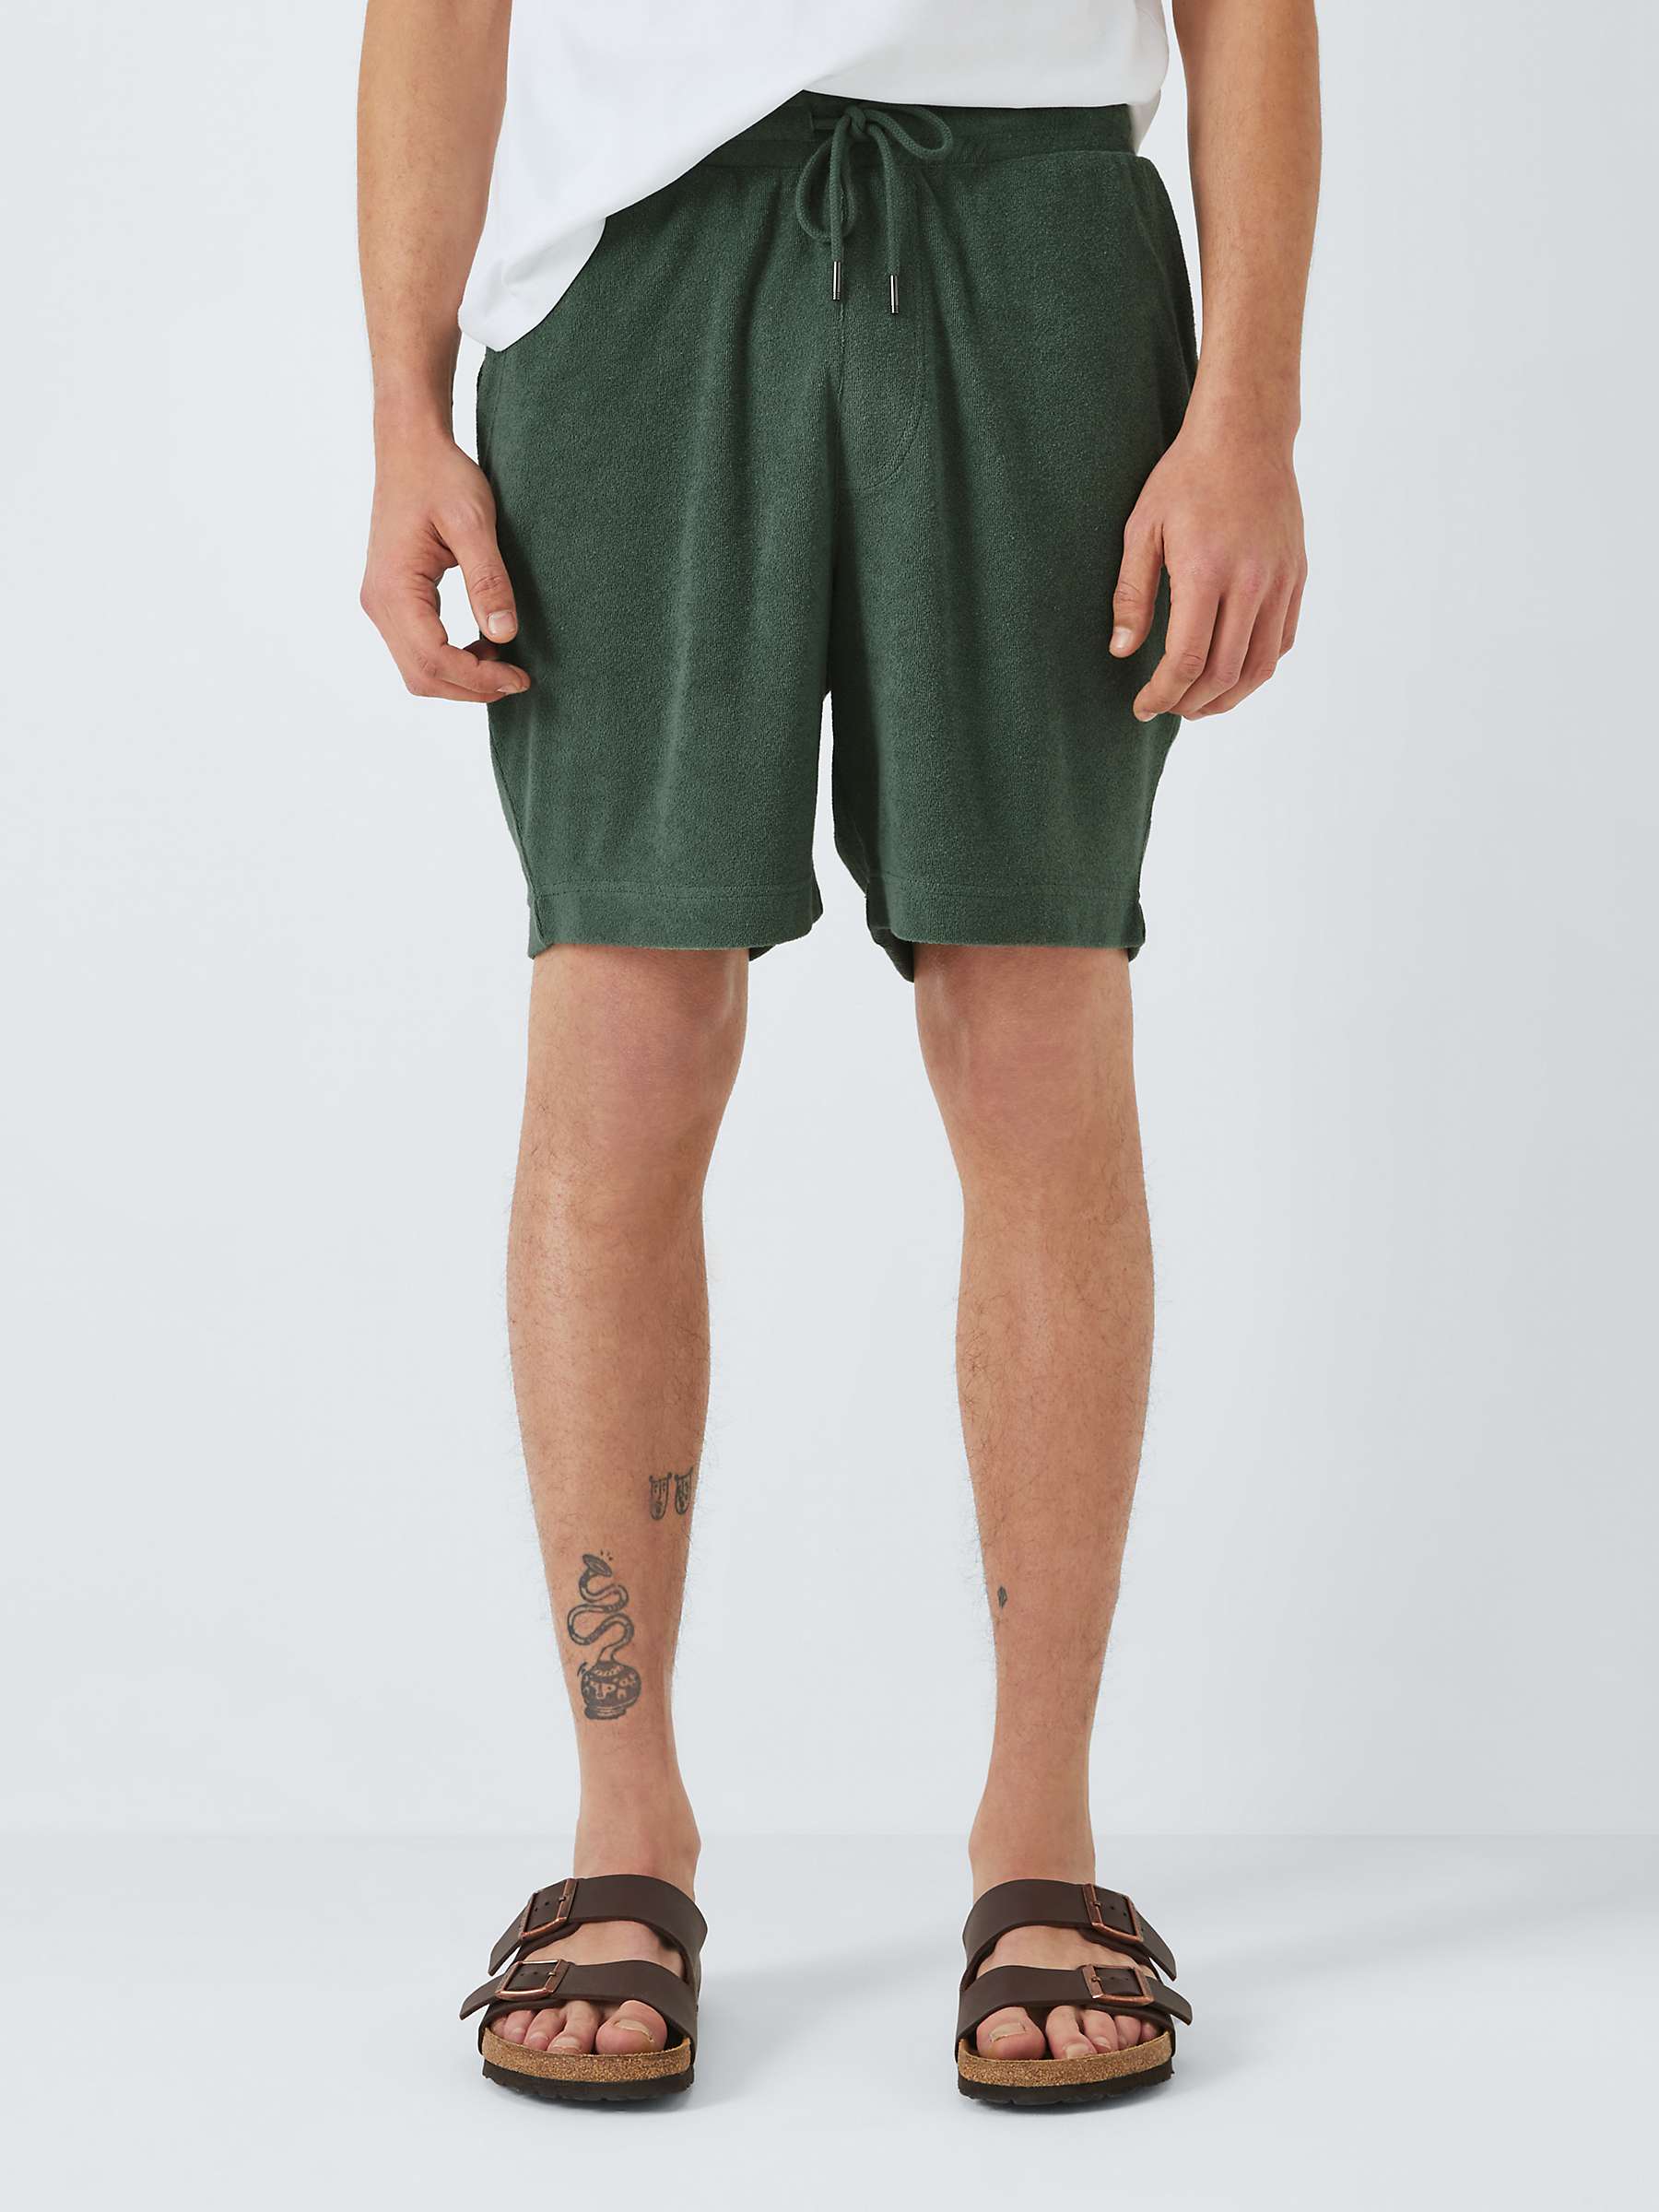 Buy John Lewis ANYDAY Towelling Shorts Online at johnlewis.com